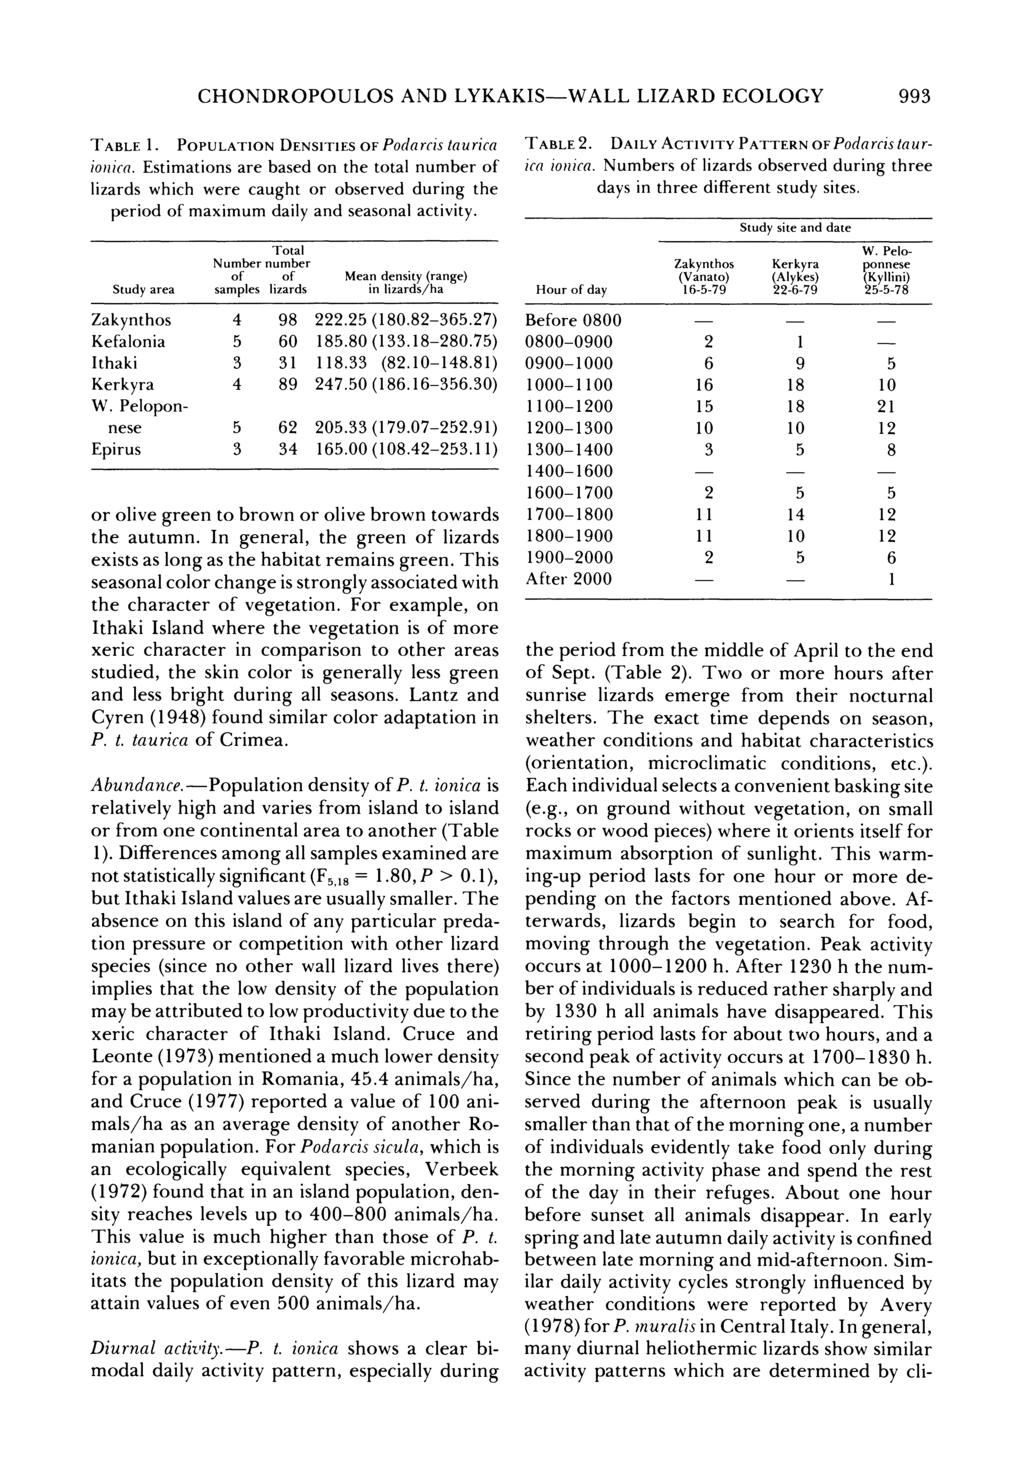 CHONDROPOULOS AND LYKAKIS-WALL LIZARD ECOLOGY 993 TABLE 1. POPULATION DENSITIES OF Podarcis taurica iowica.